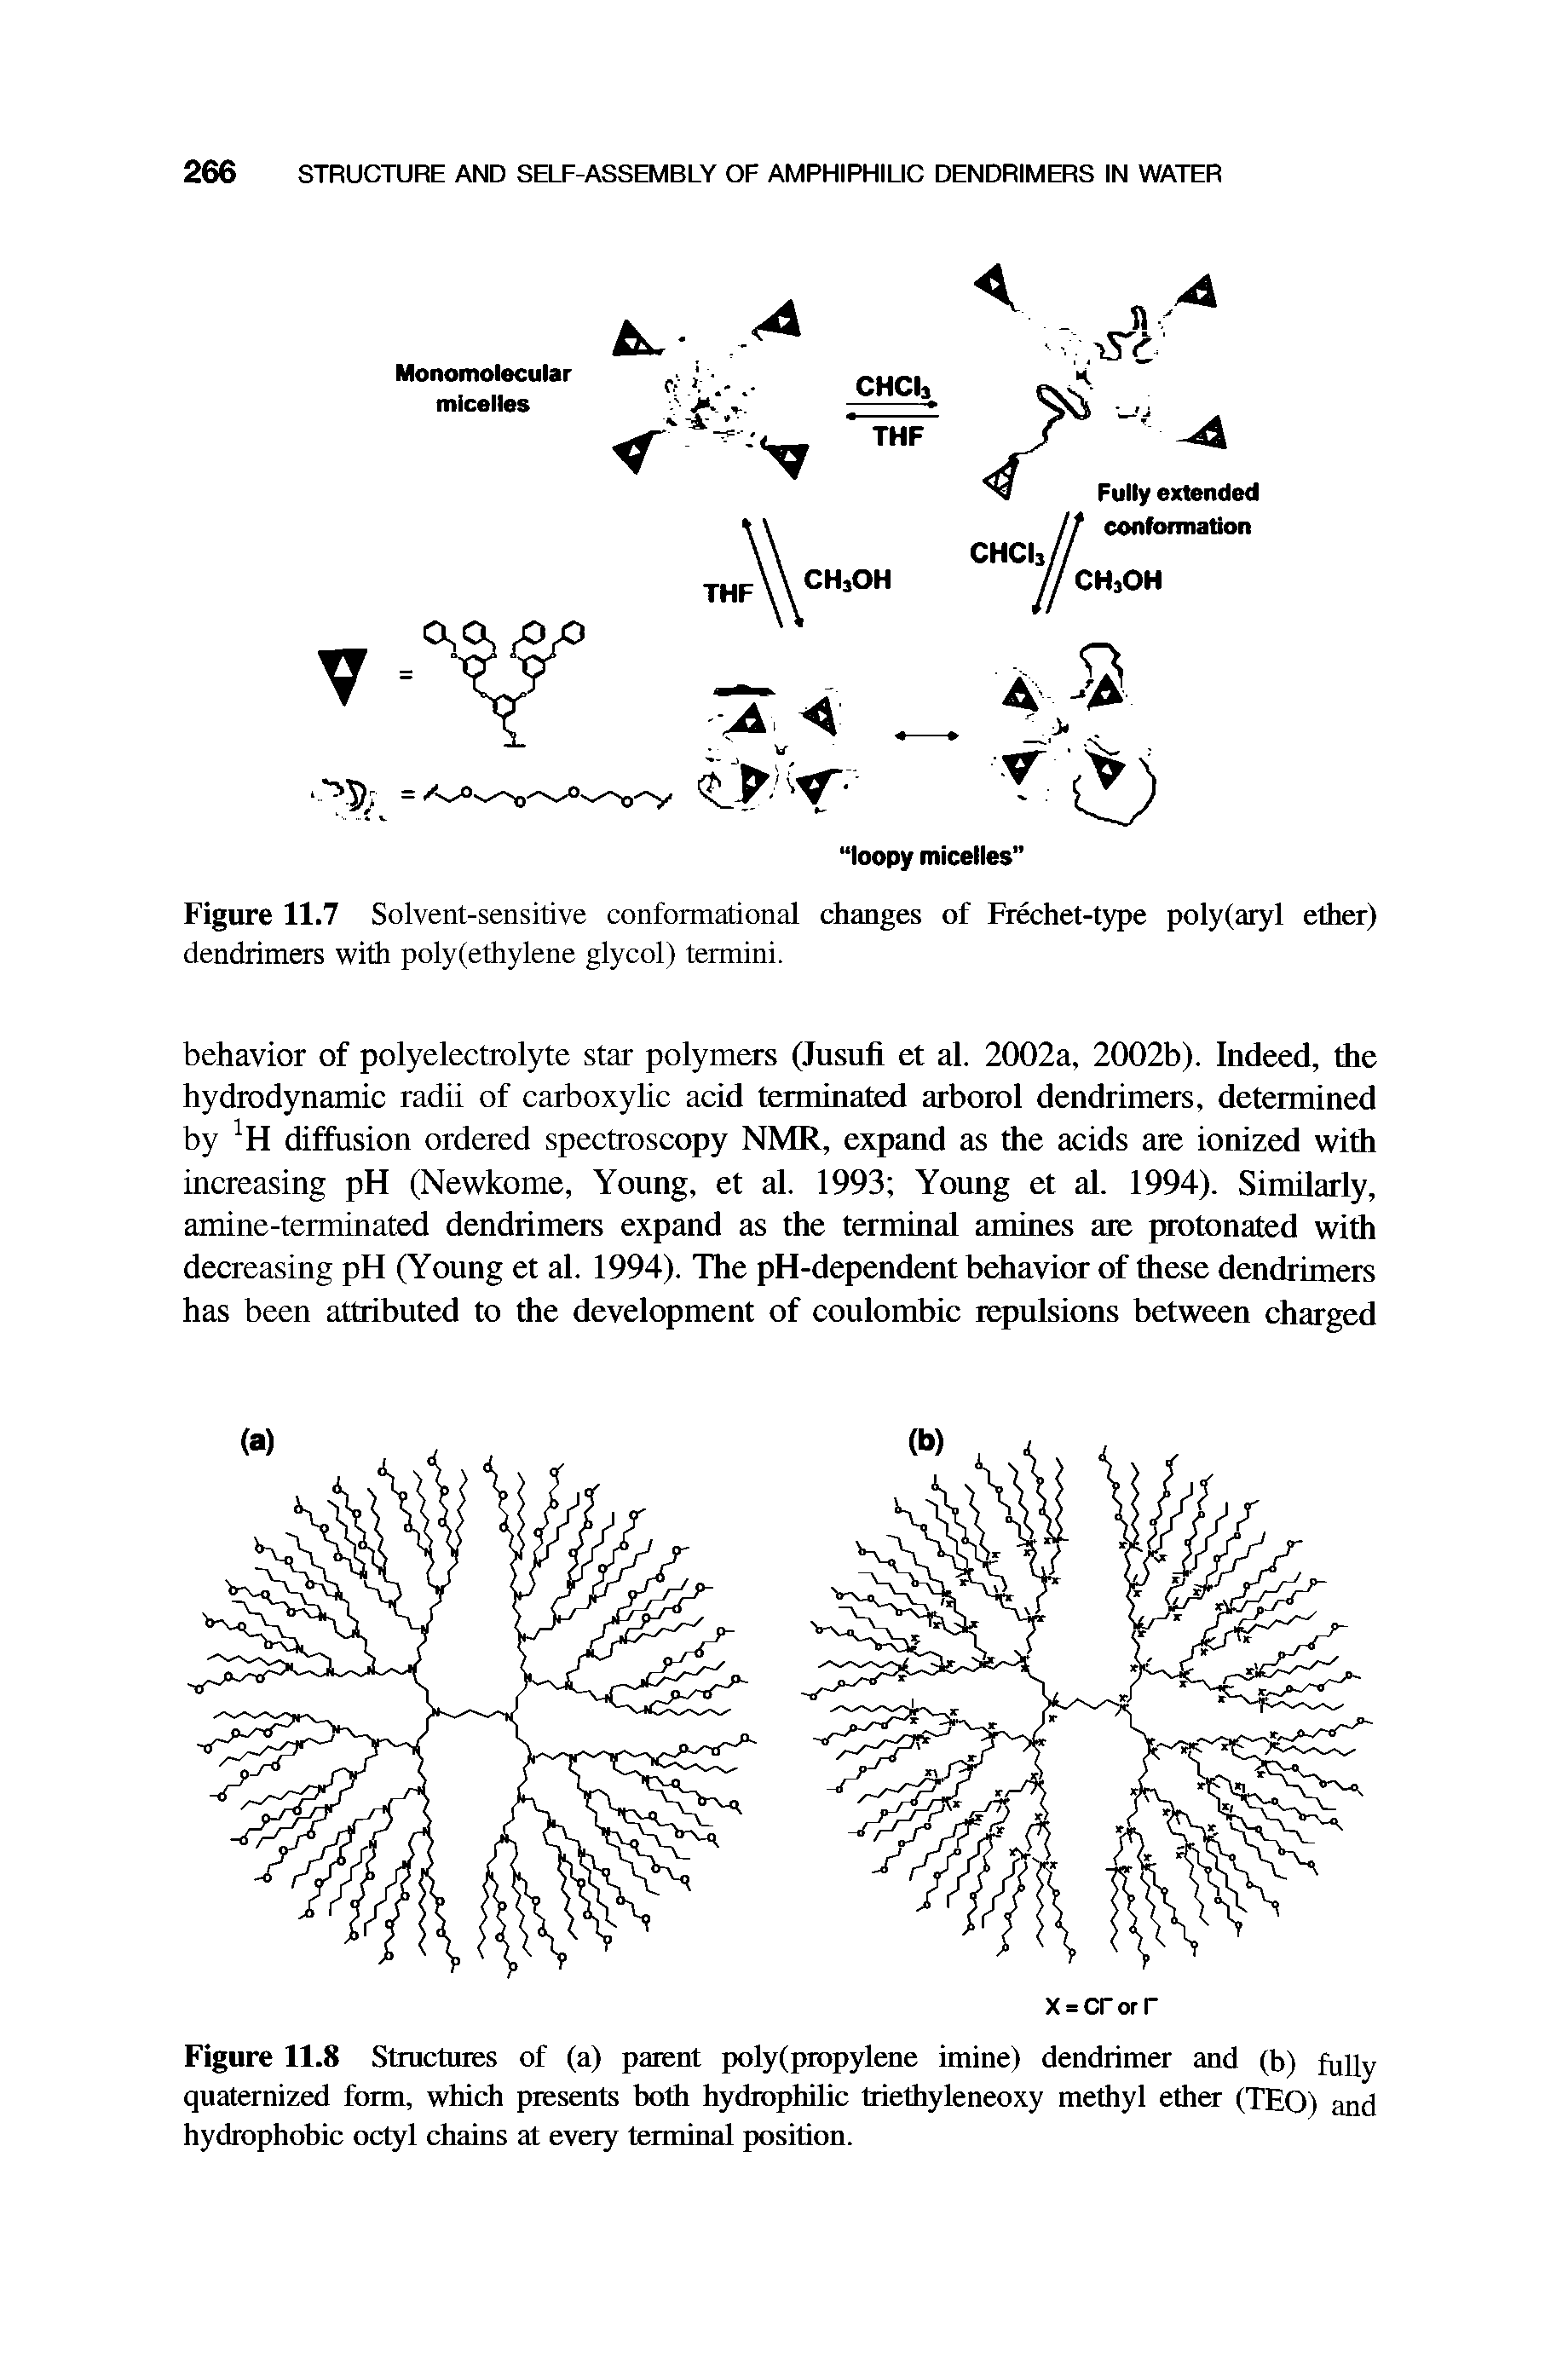 Figure 11.8 Stmctuies of (a) patent poly(piopylene imine) dendrimer and (h) fully quaternized form, which presents hoth hydrophilic triethyleneoxy methyl ether (TEO) and hydrophobic octyl chains at every terminal position.